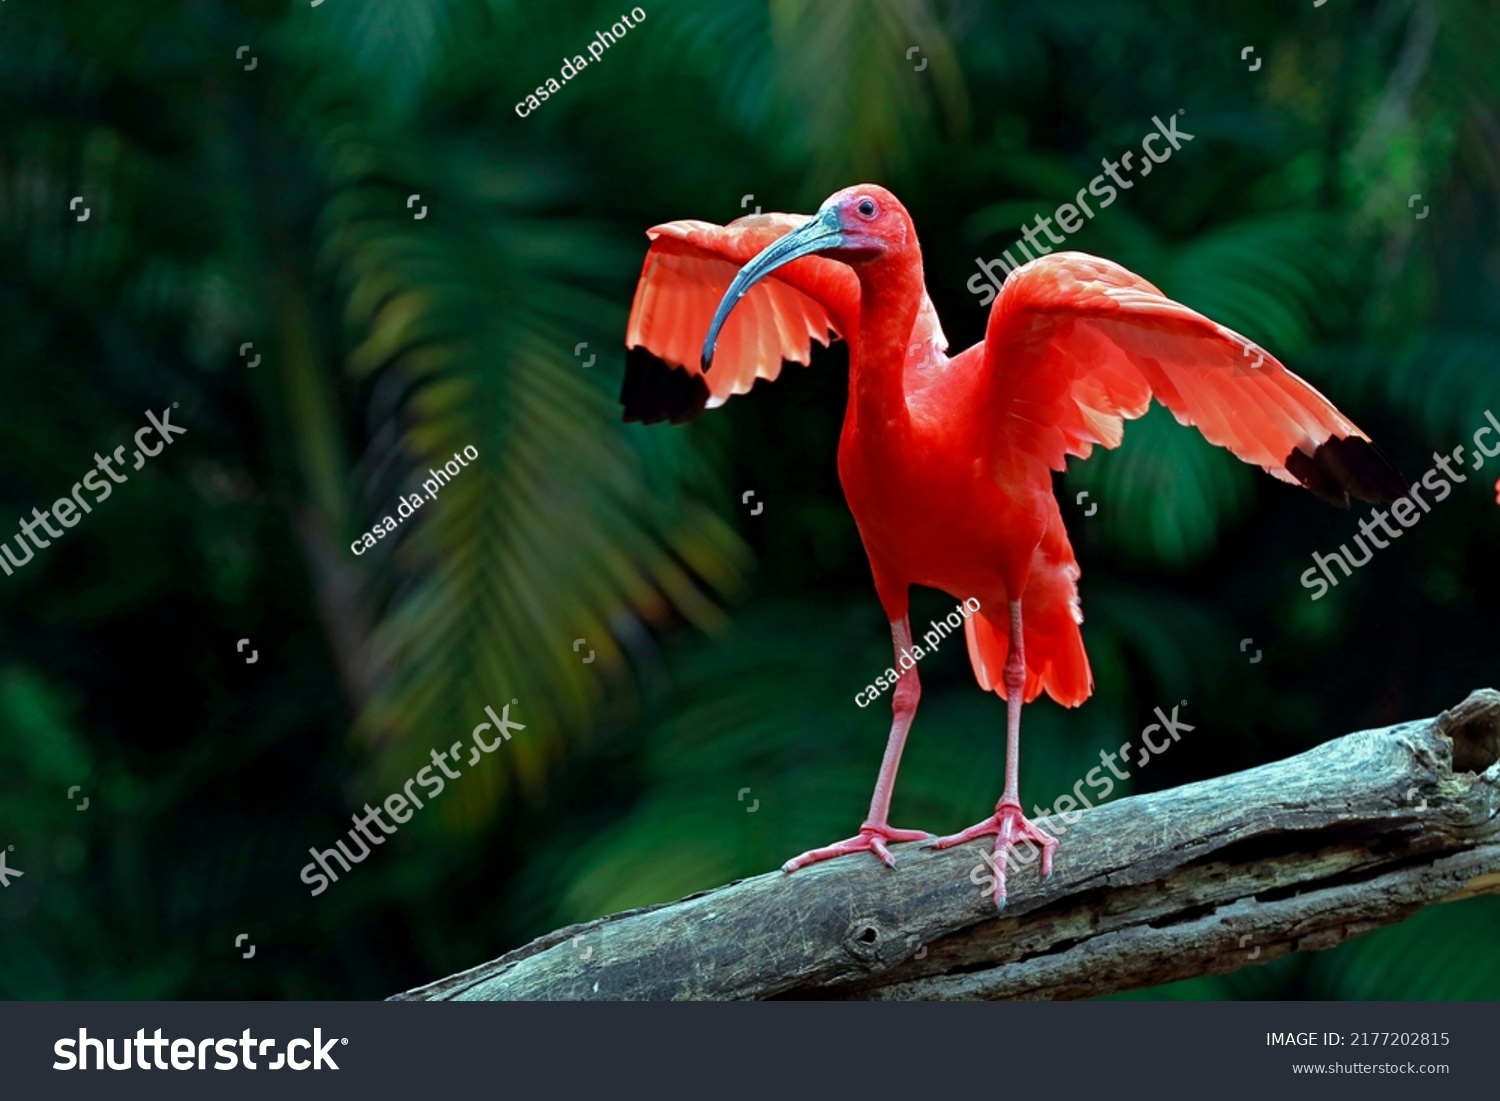 Closeup of scarlet ibis with wings wide open on tree trunk over dark forest background. Brazil #2177202815